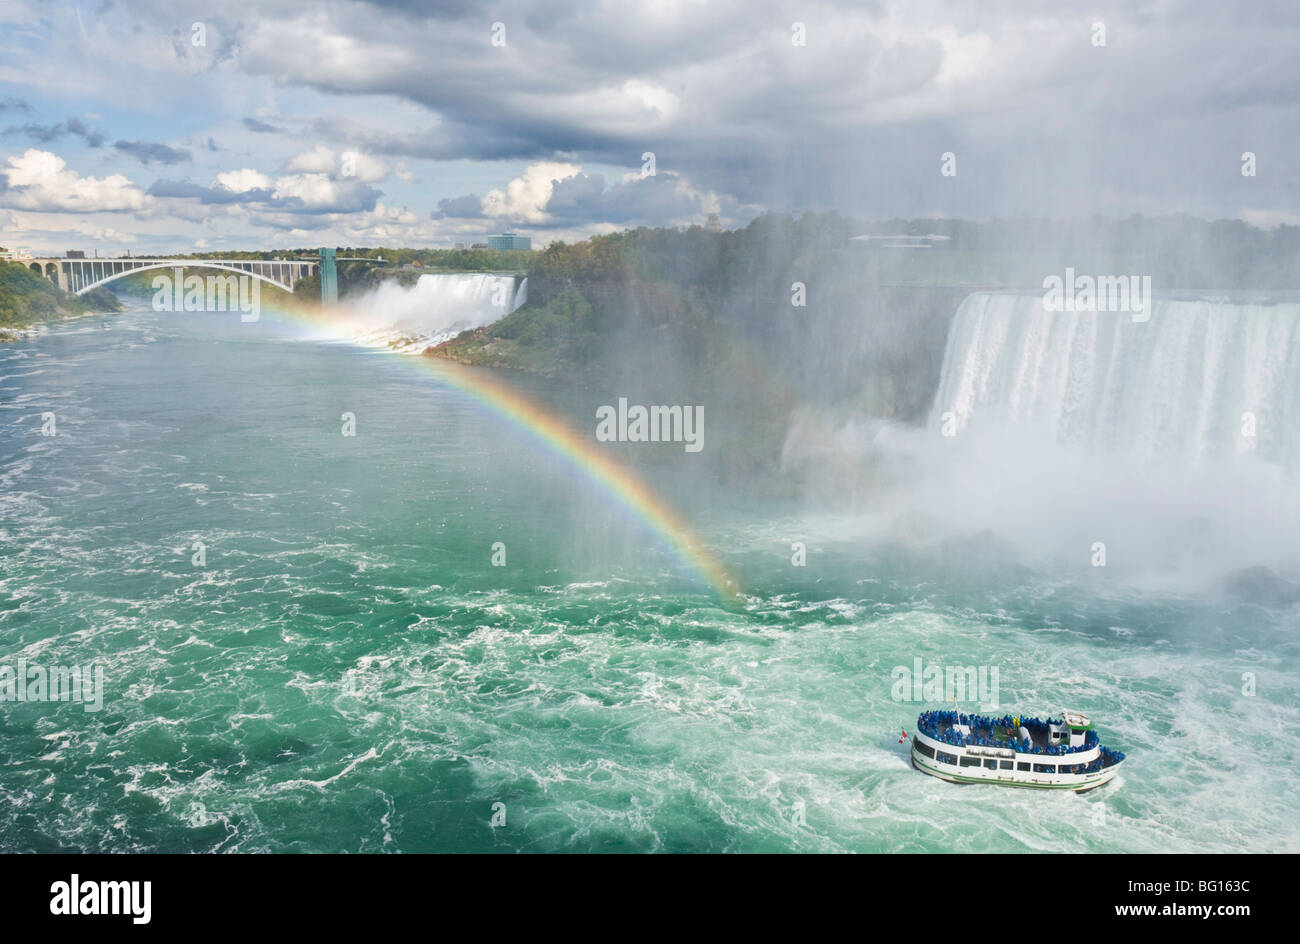 Maid of the Mist tour excursion boat under the Horseshoe Falls waterfall with rainbow at Niagara Falls, Ontario, Canada Stock Photo